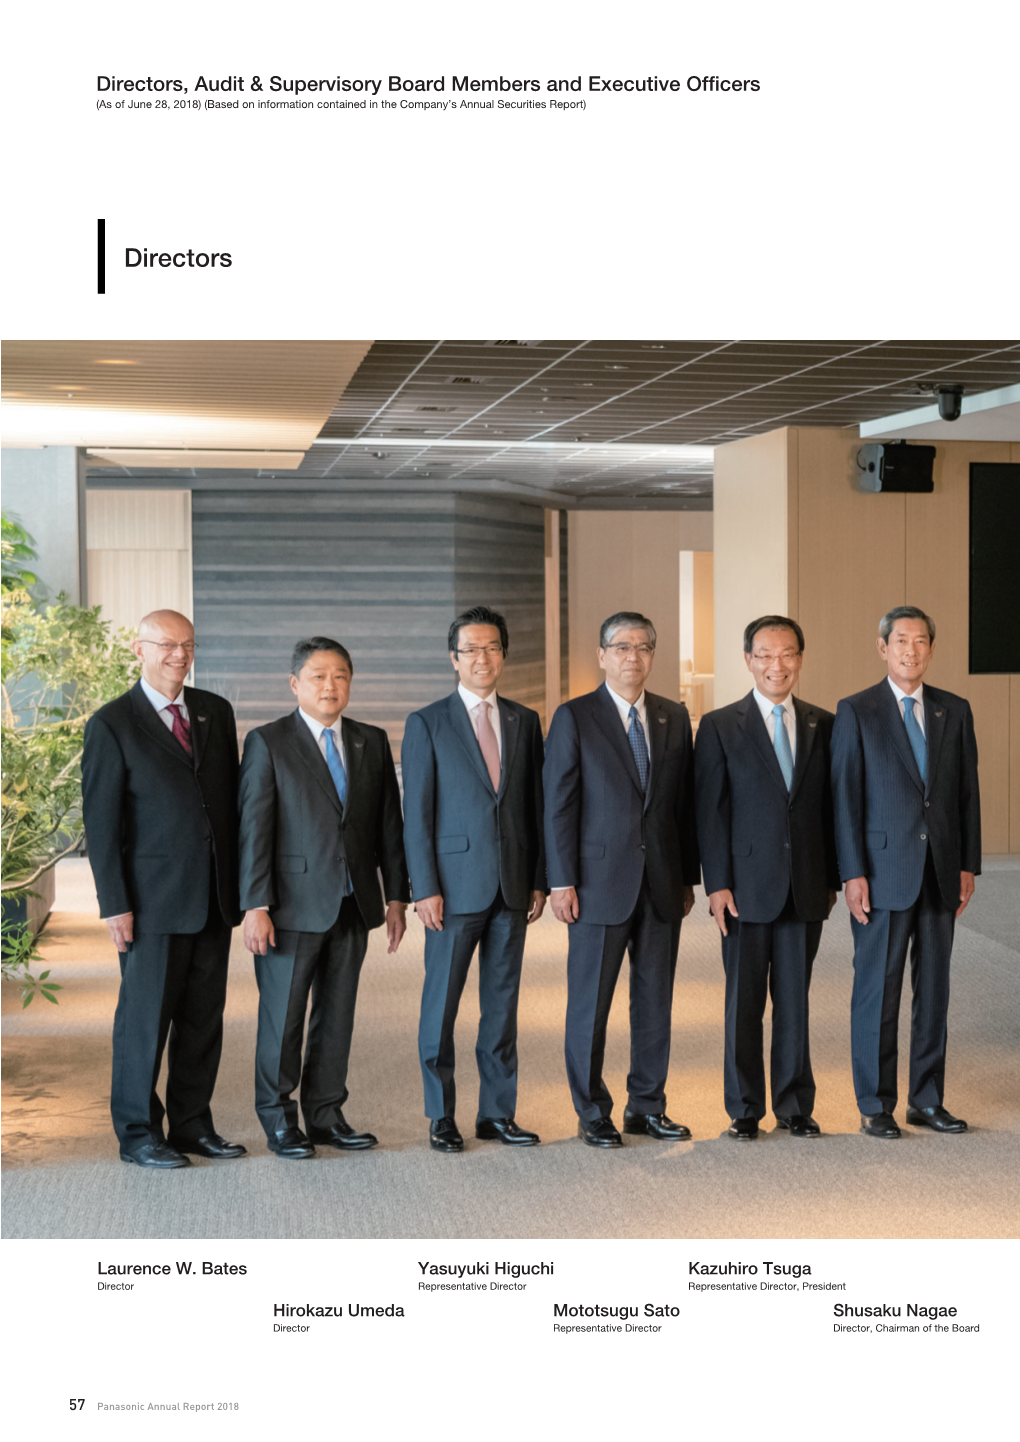 Directors, Audit & Supervisory Board Members and Executive Officers